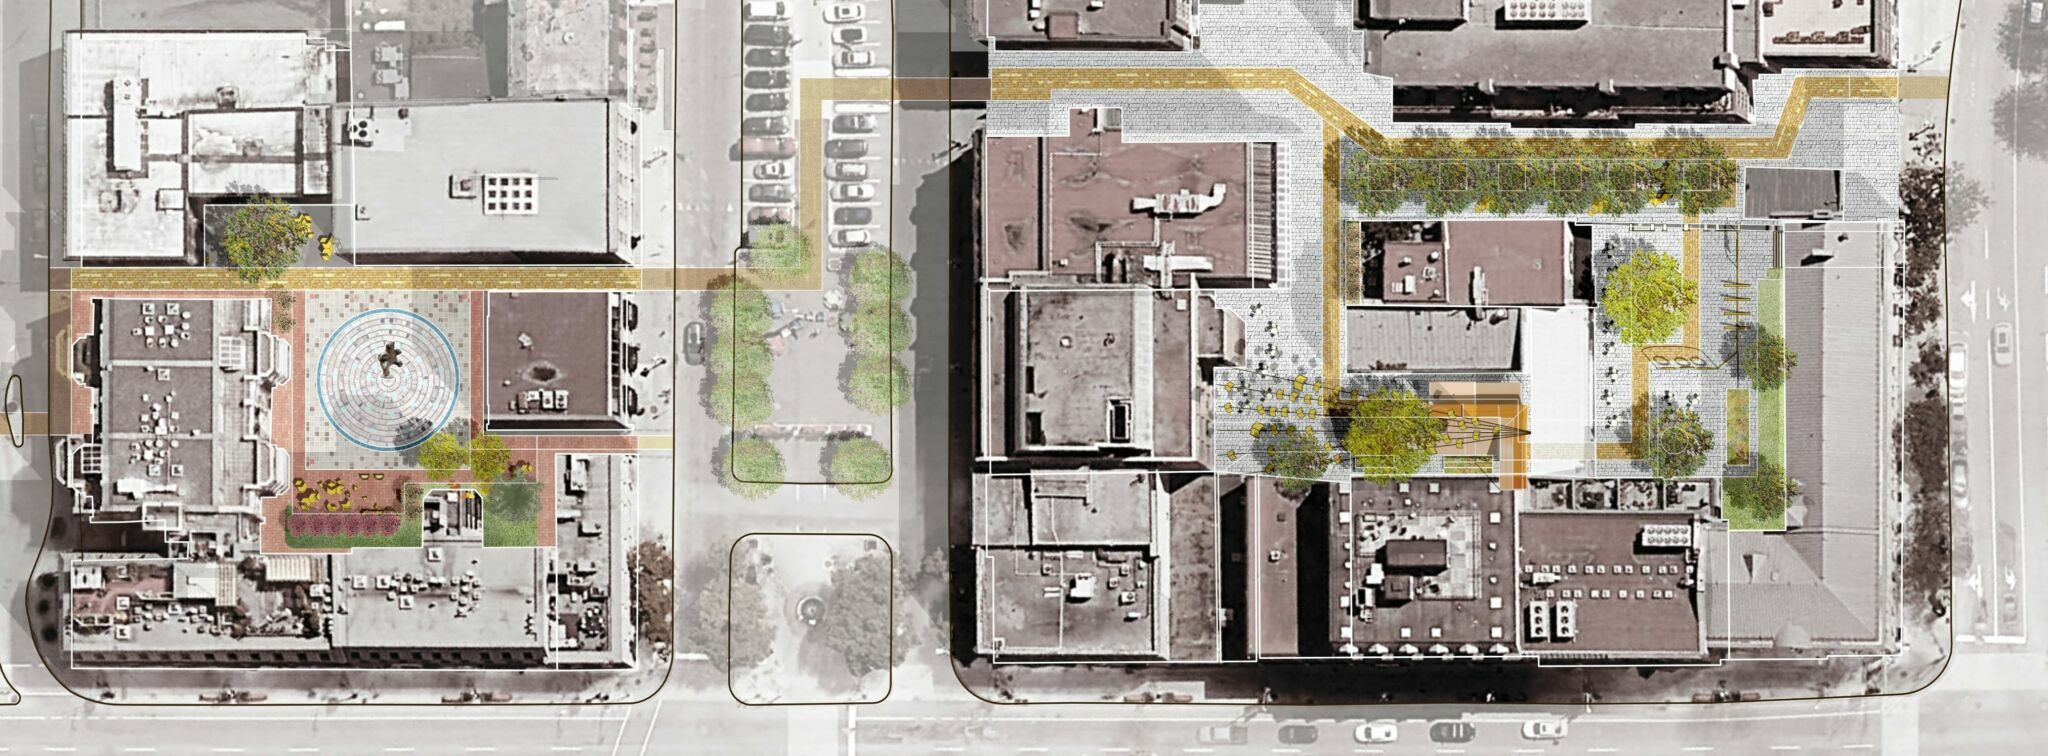 Aerial view of three courtyards: Jeanne d’Arc, York Court and Clarendon Court .